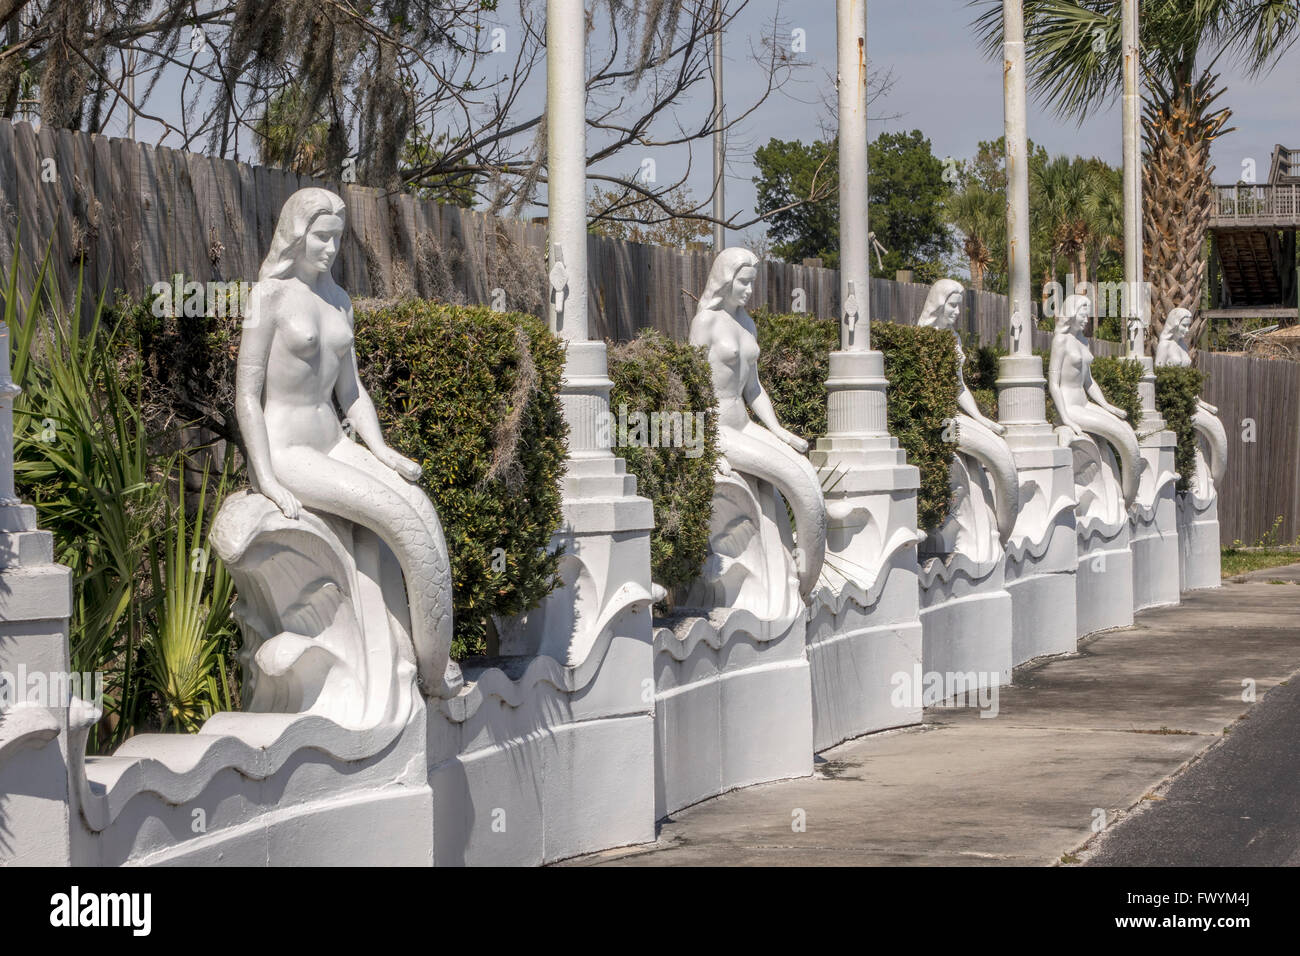 Mermaid Statues Outside The Entrance To The Weeki Wachee Mermaid Attraction Florida Stock Photo